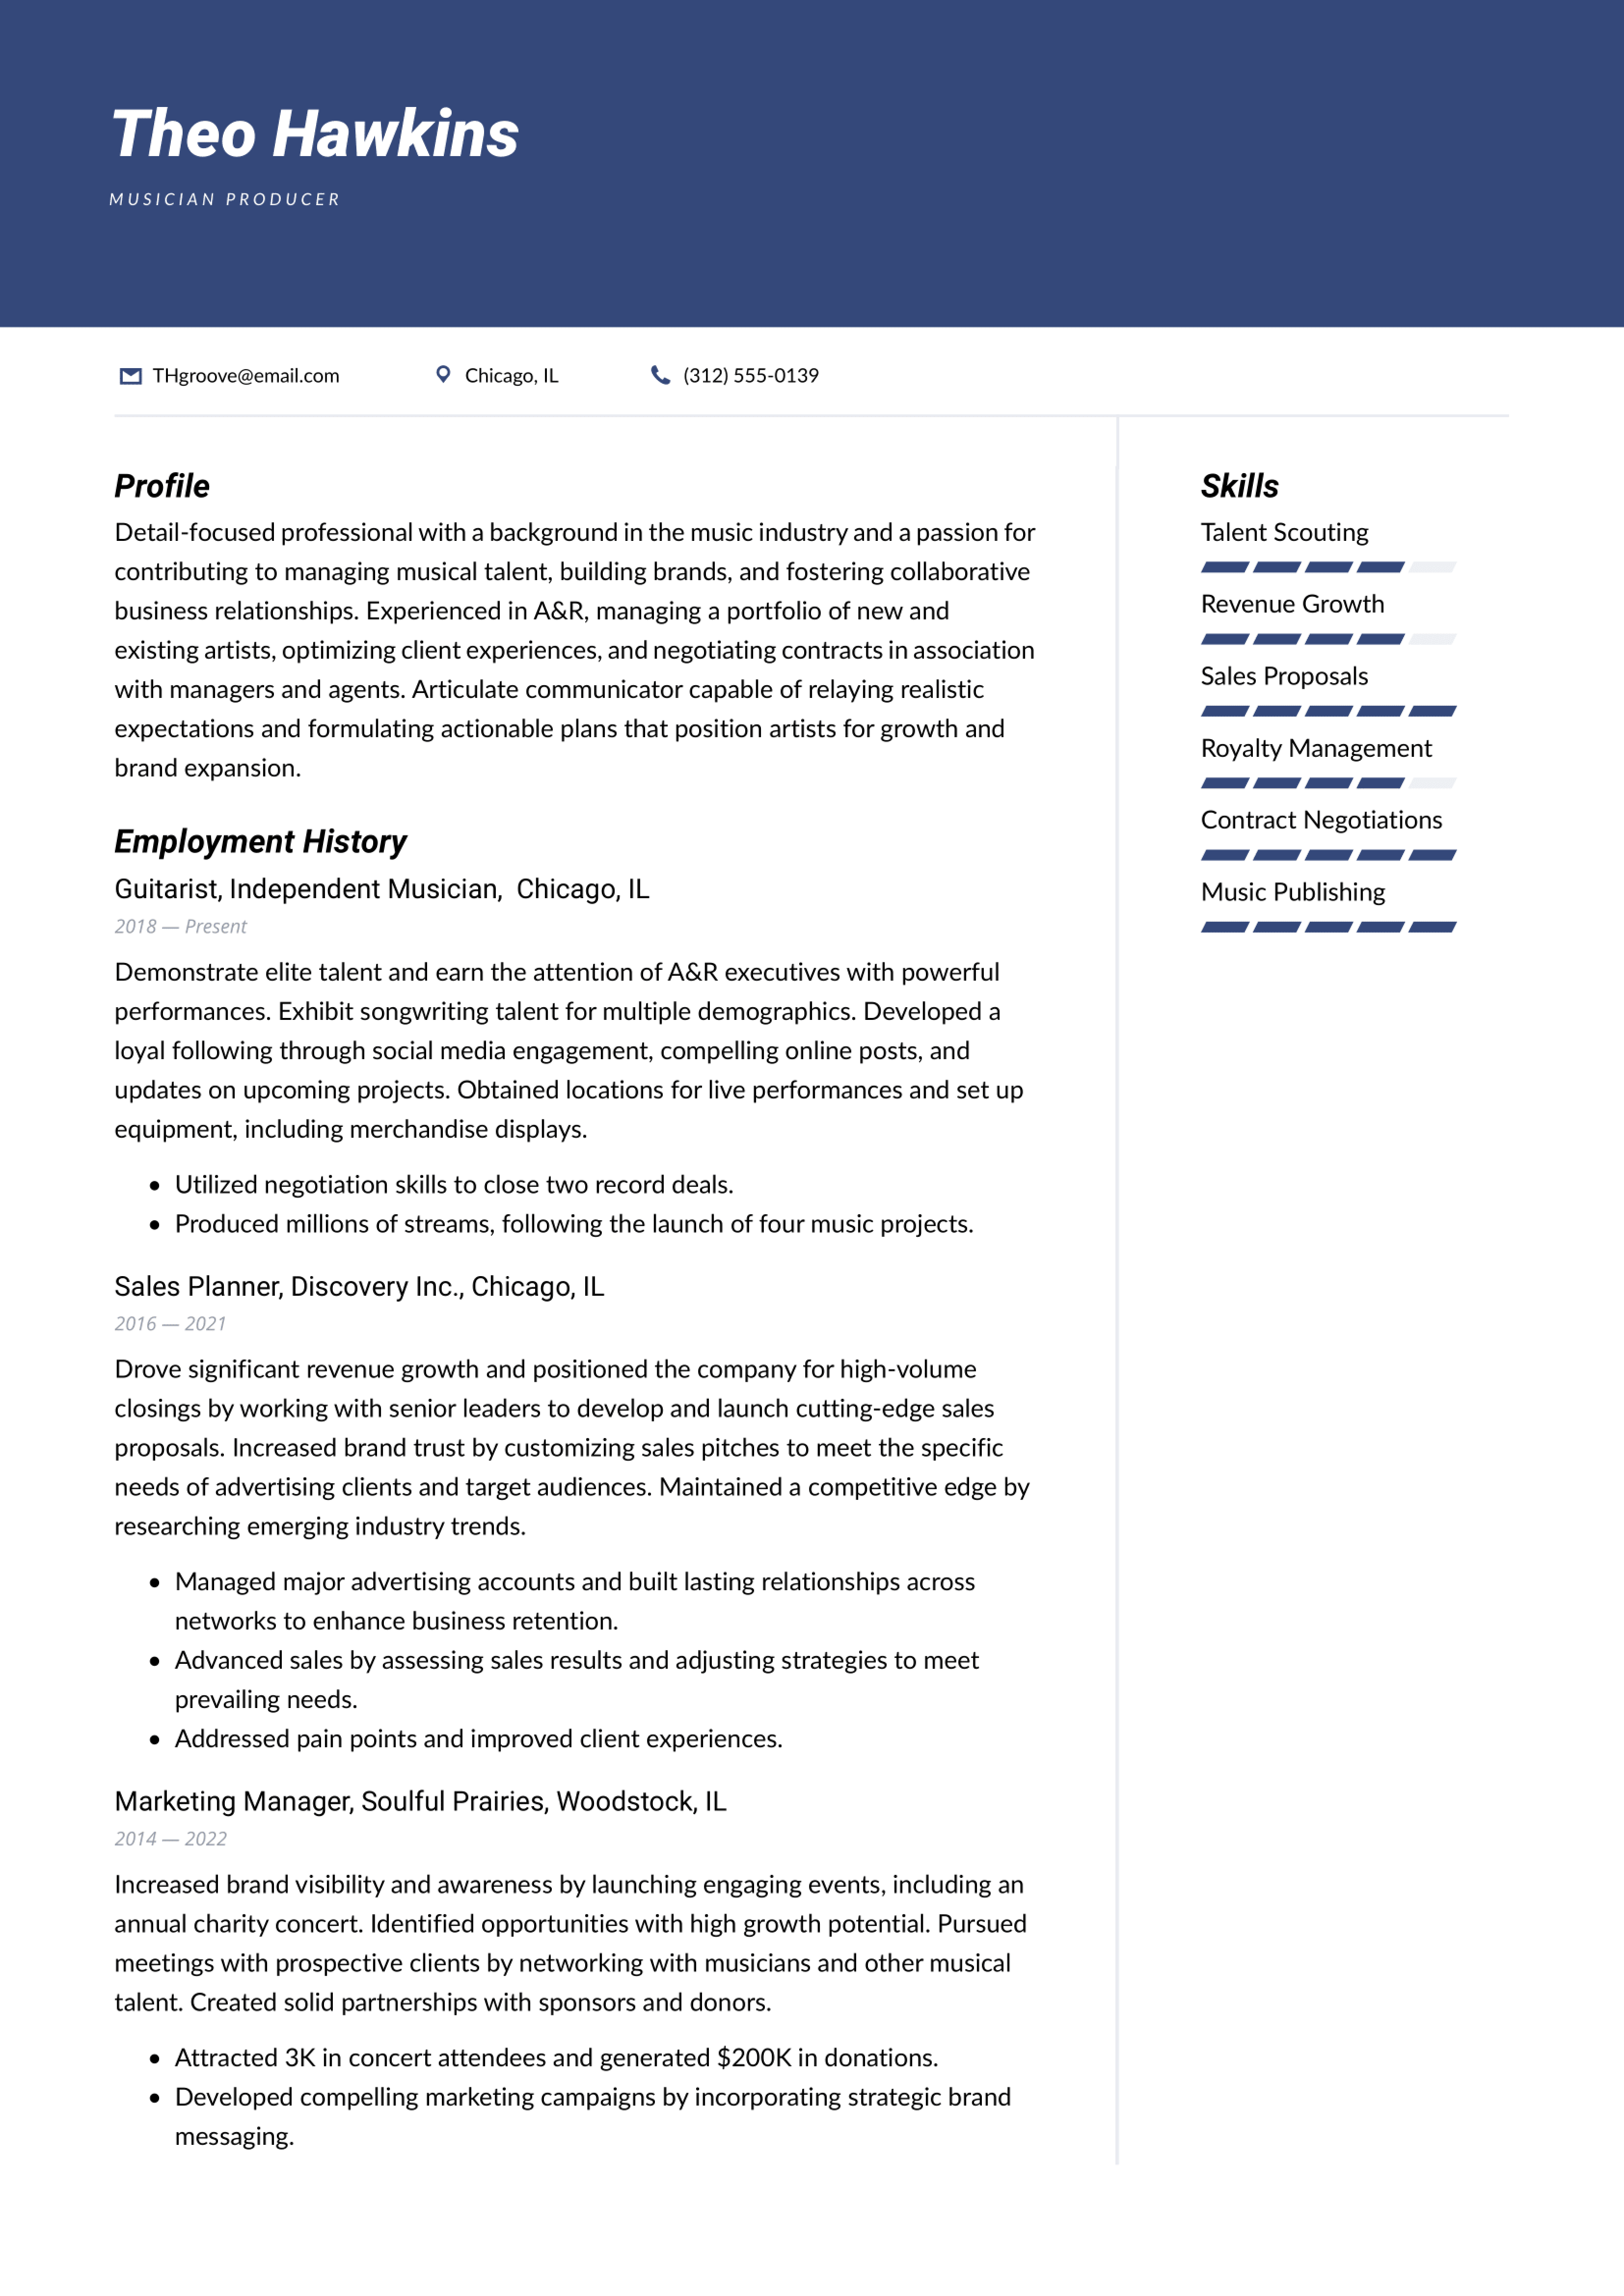 Musician Producer Resume Example 